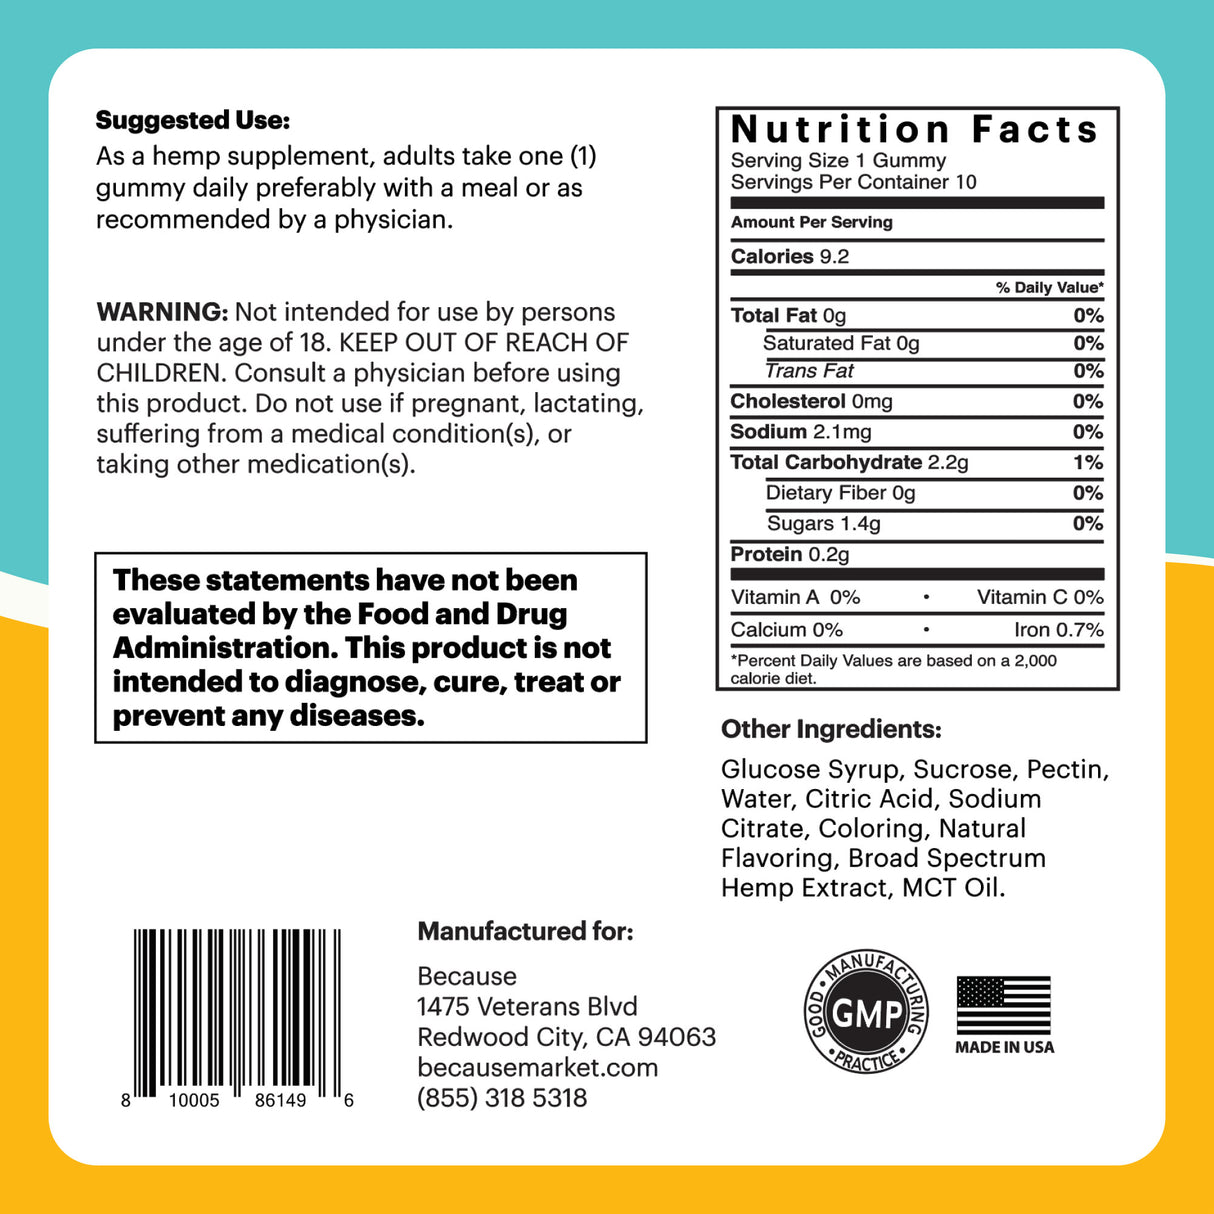 This image details the nutritional information of the product..